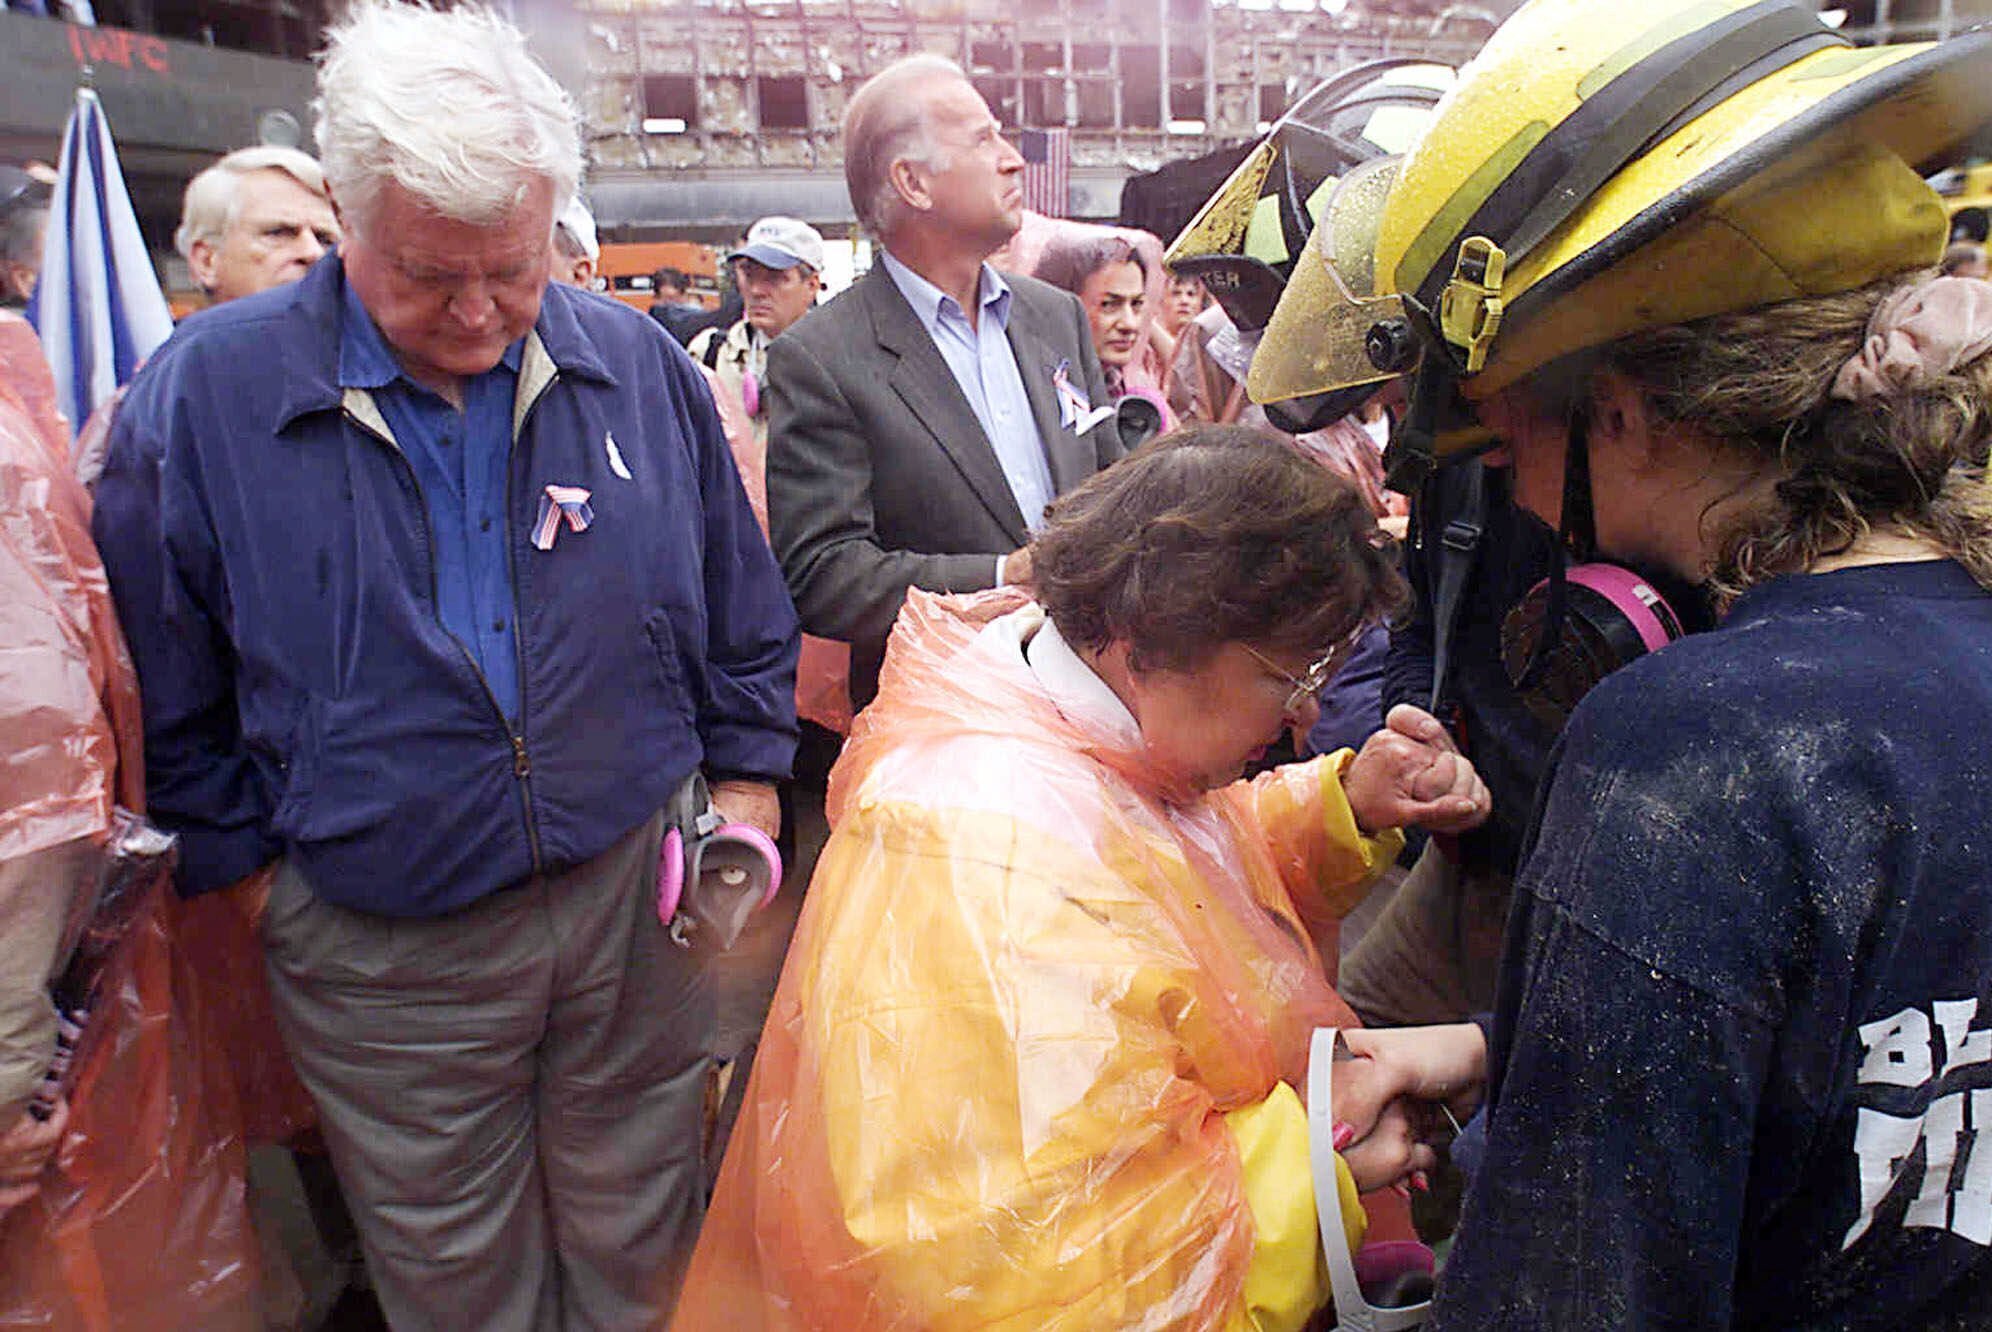 FILE - In this Sept. 20, 2001, file photo Sen. Ted Kennedy, D-Mass., left, and Sen. Joe Biden, center, stand by as Sen. Barbara Mikulski, D-Md., in orange parka, joins in prayer with rescue workers at the site of the World Trade Center in New York. They were part of a delegation of Senators that traveled by train to New York to view the rubble that once was the World Trade Center.